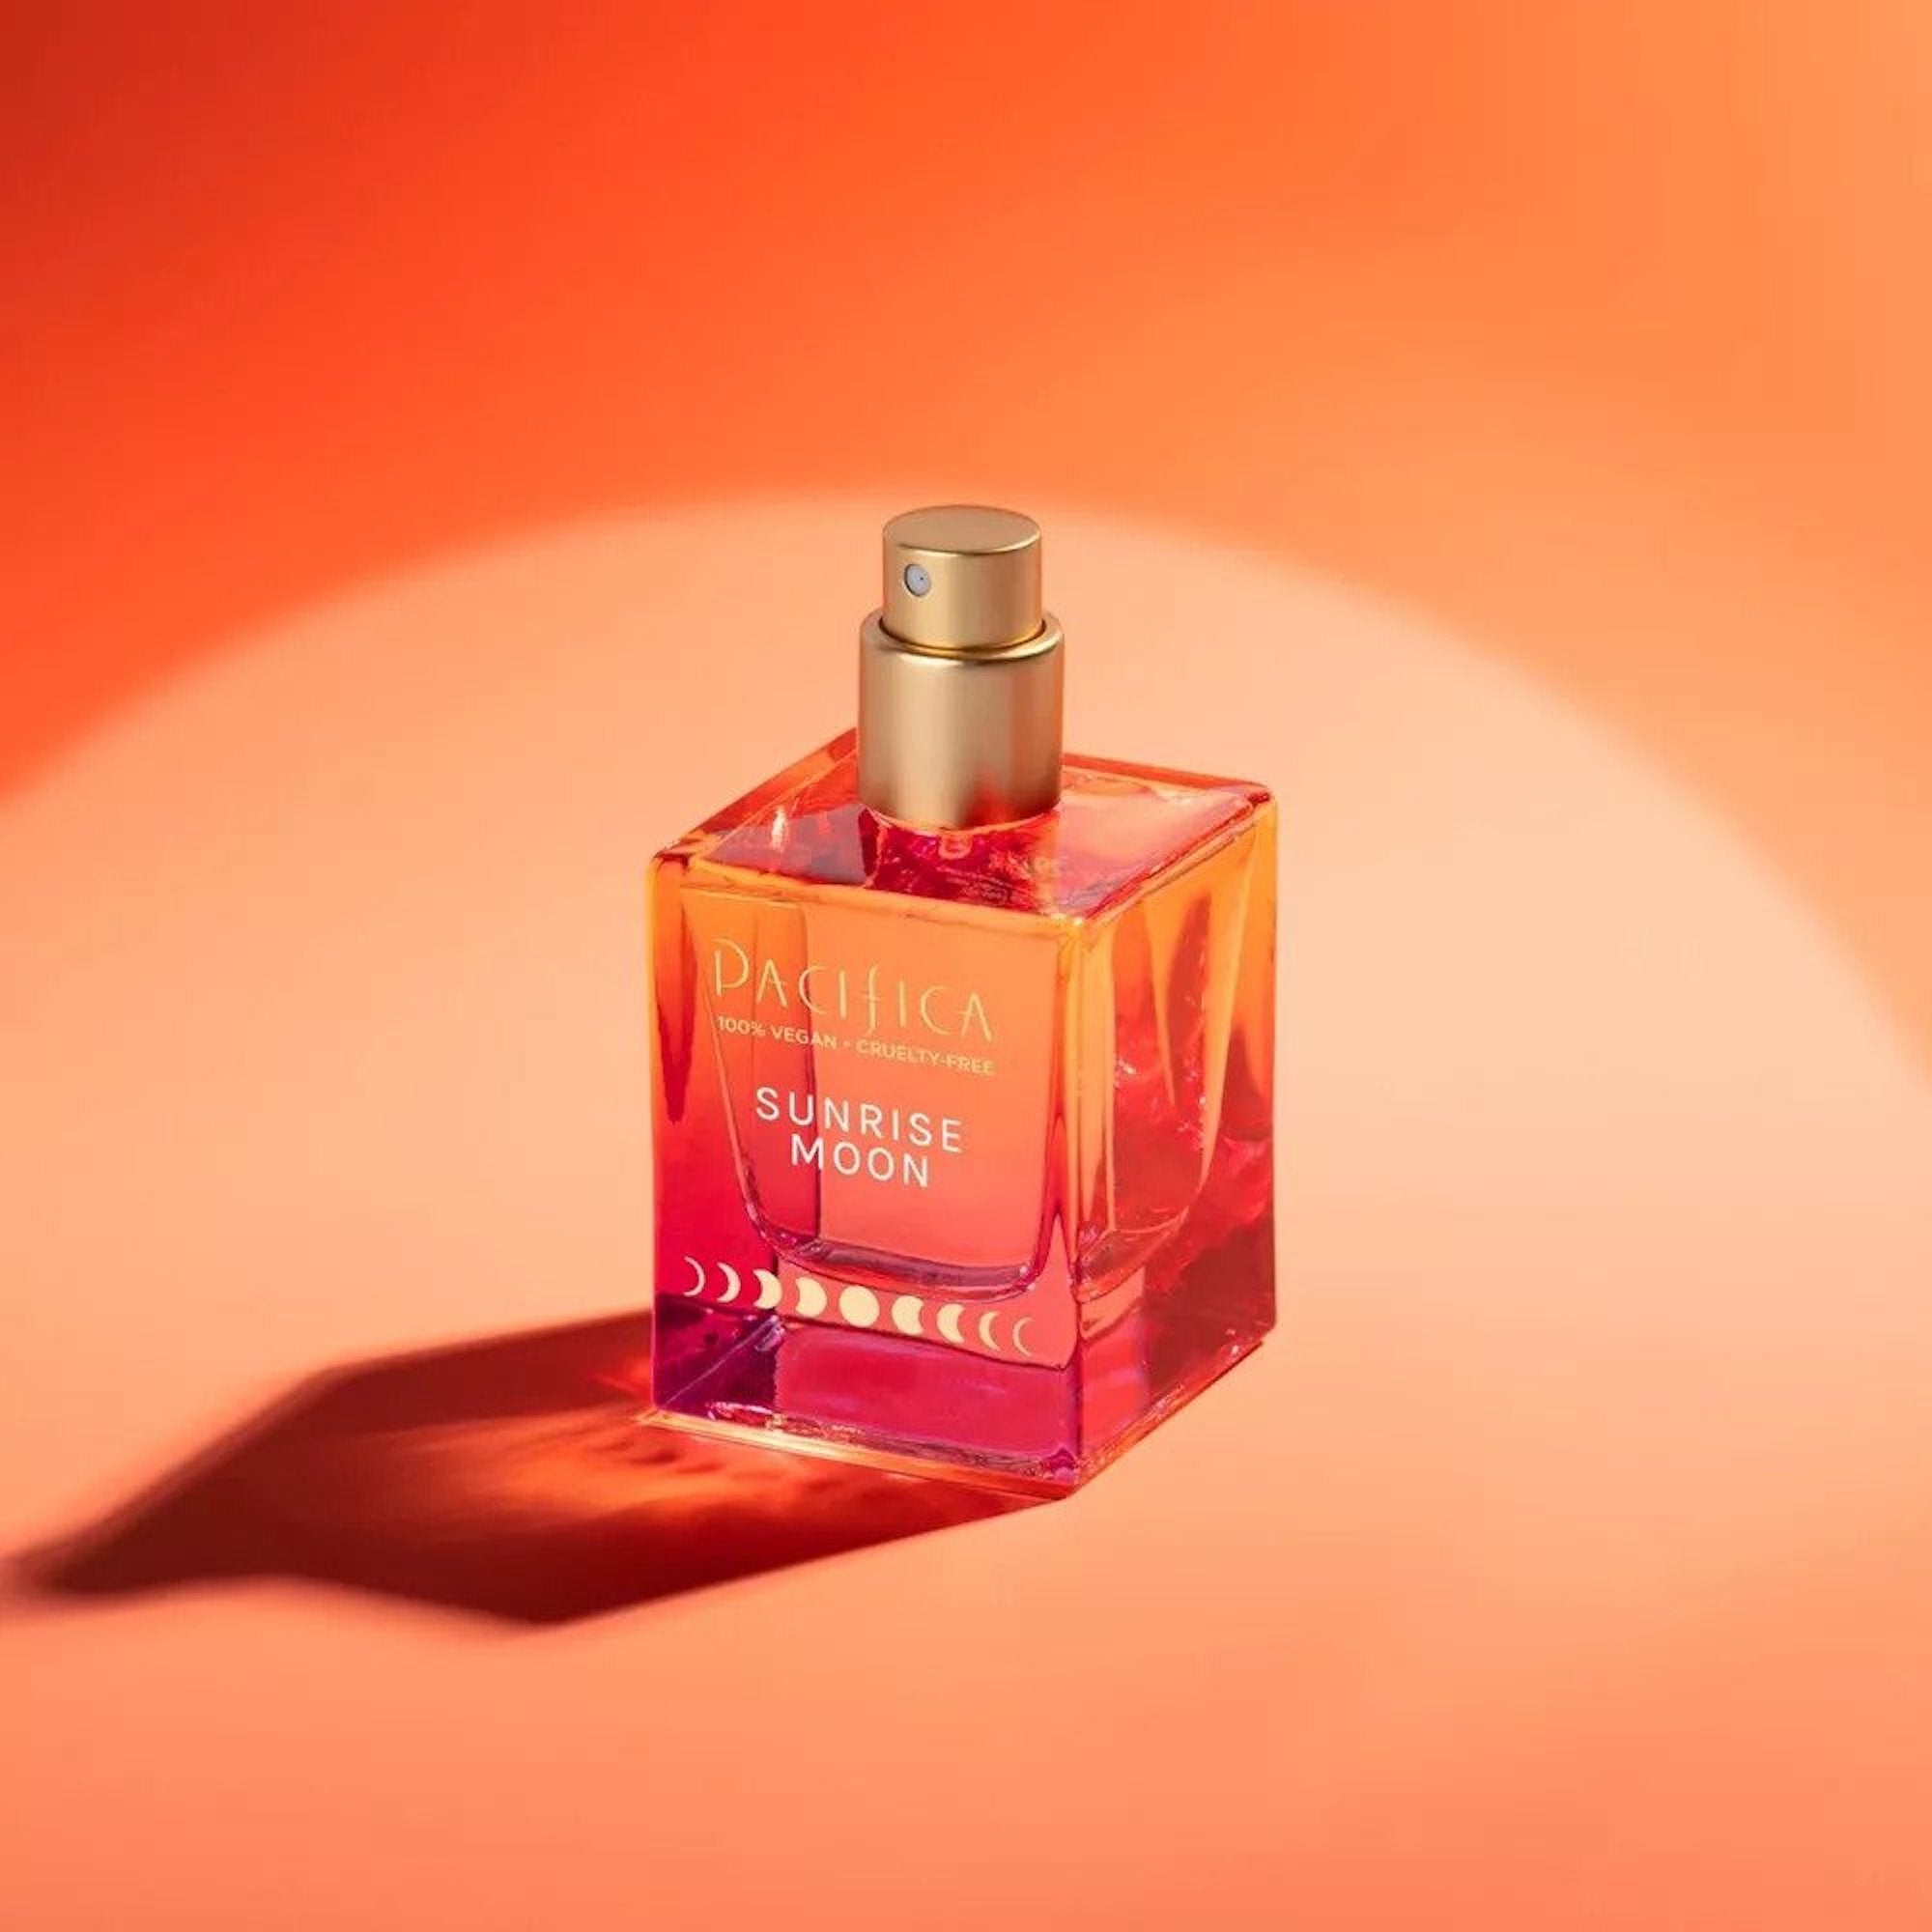 Are the perfumes on Myntra genuine? - Quora